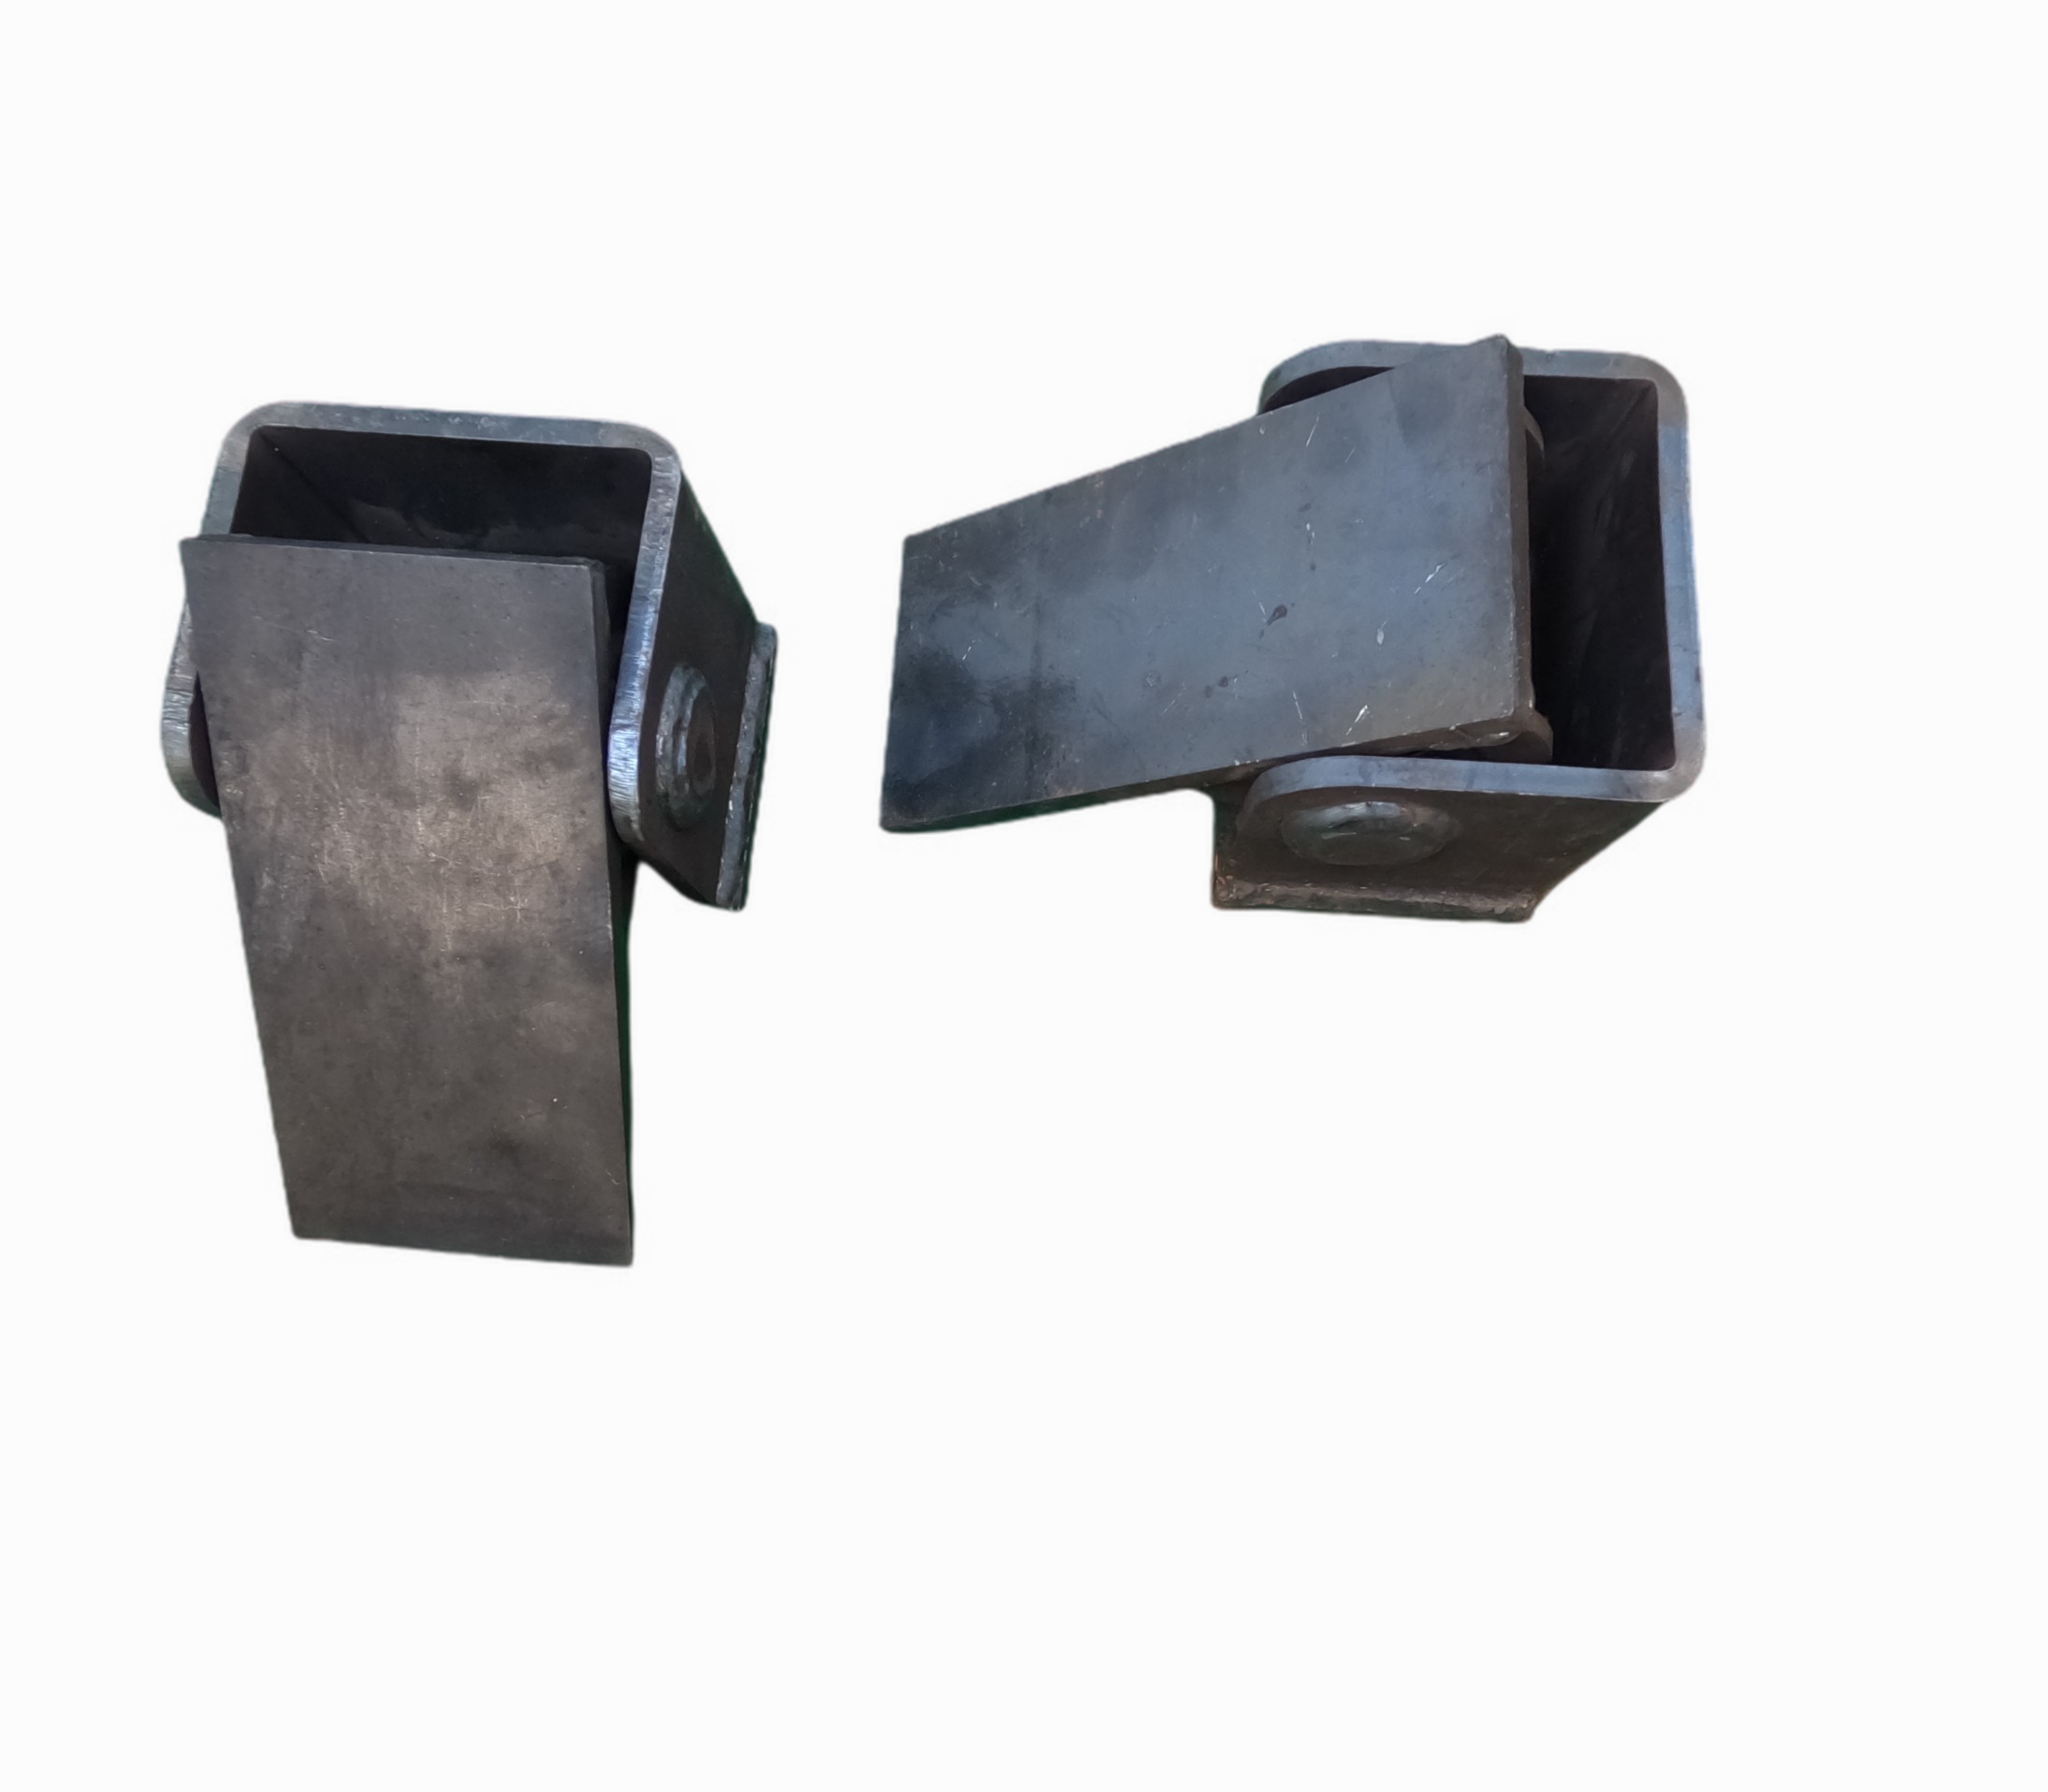 Heavy duty dump bed hinges. Used for hydraulic dump bed systems. 